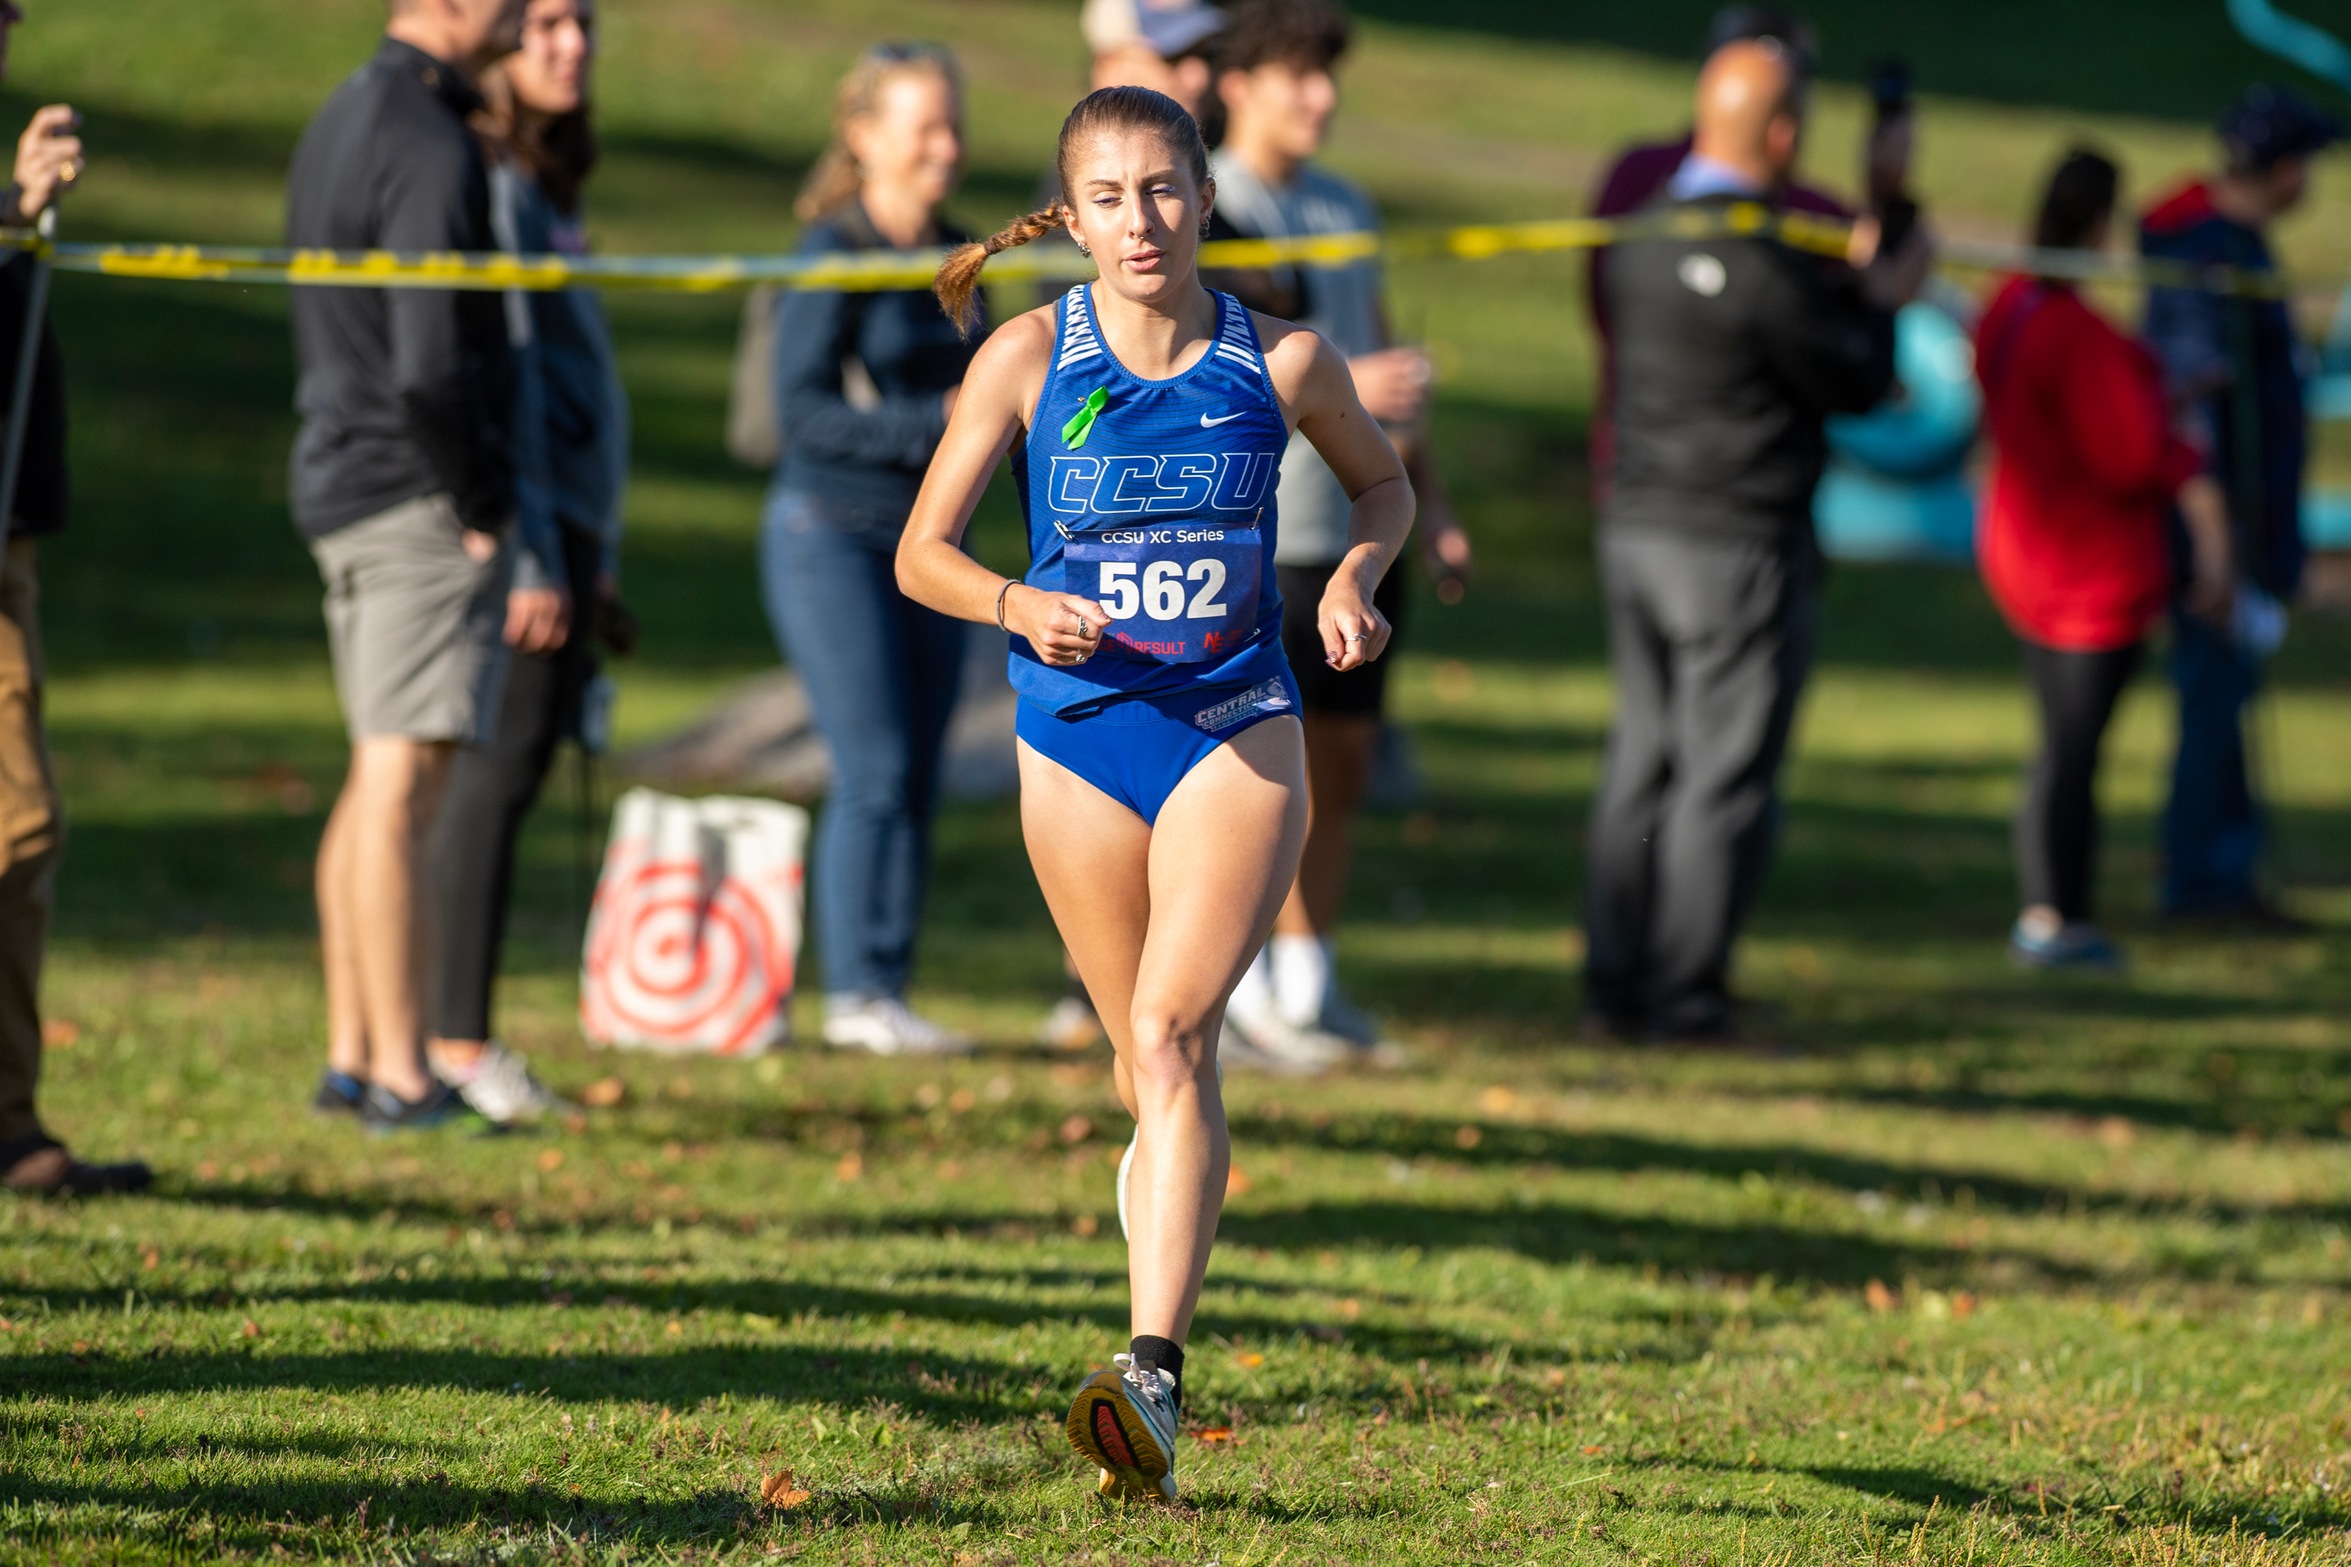 Brooke Morabito was second in the 3,000m run at the UMass Flagship Invitational on January 15, 2023.